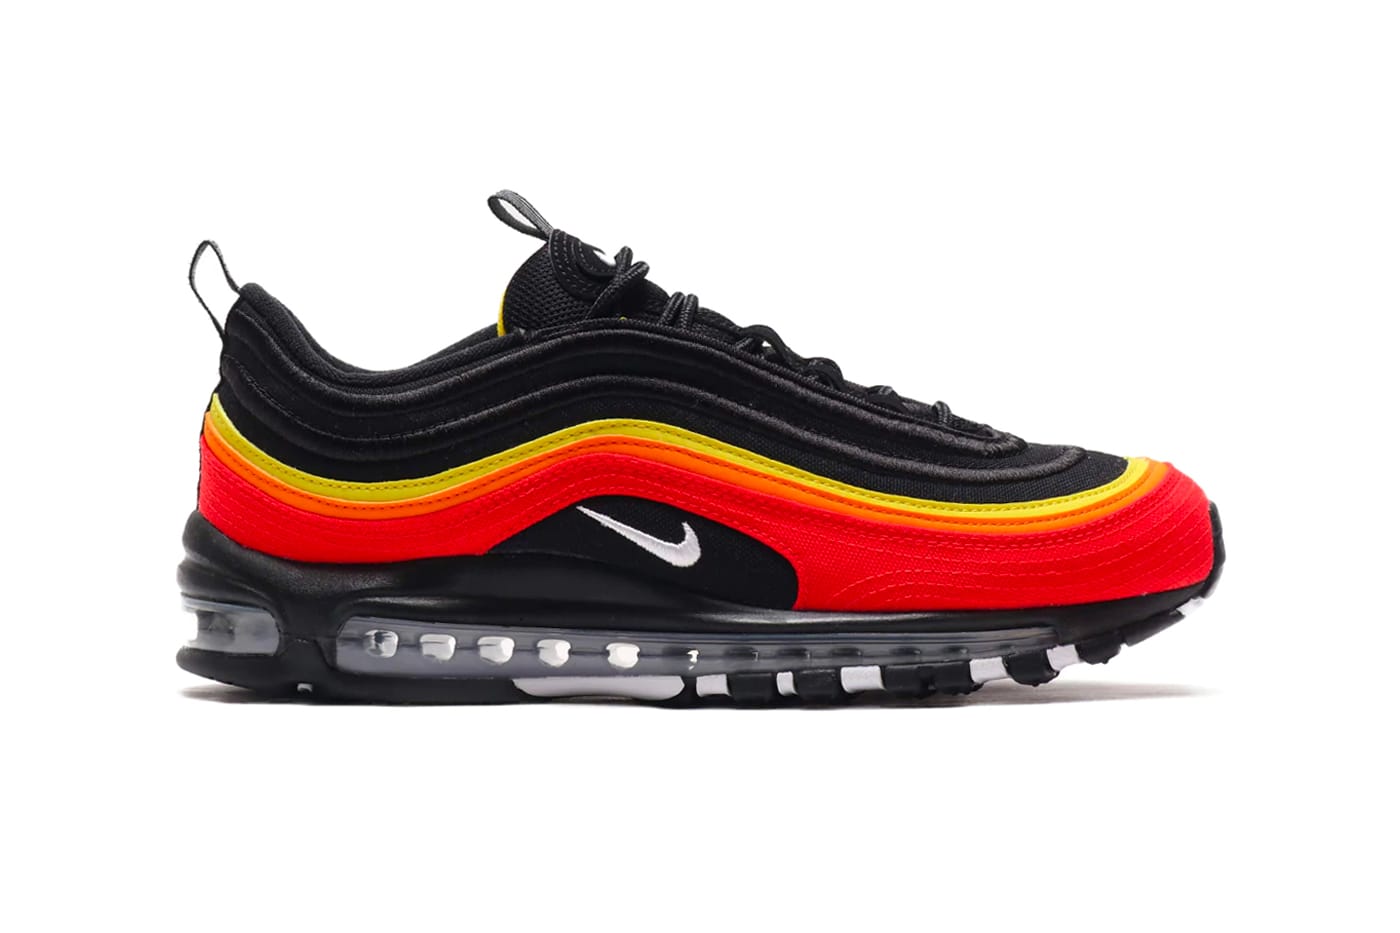 red air max 97 release date